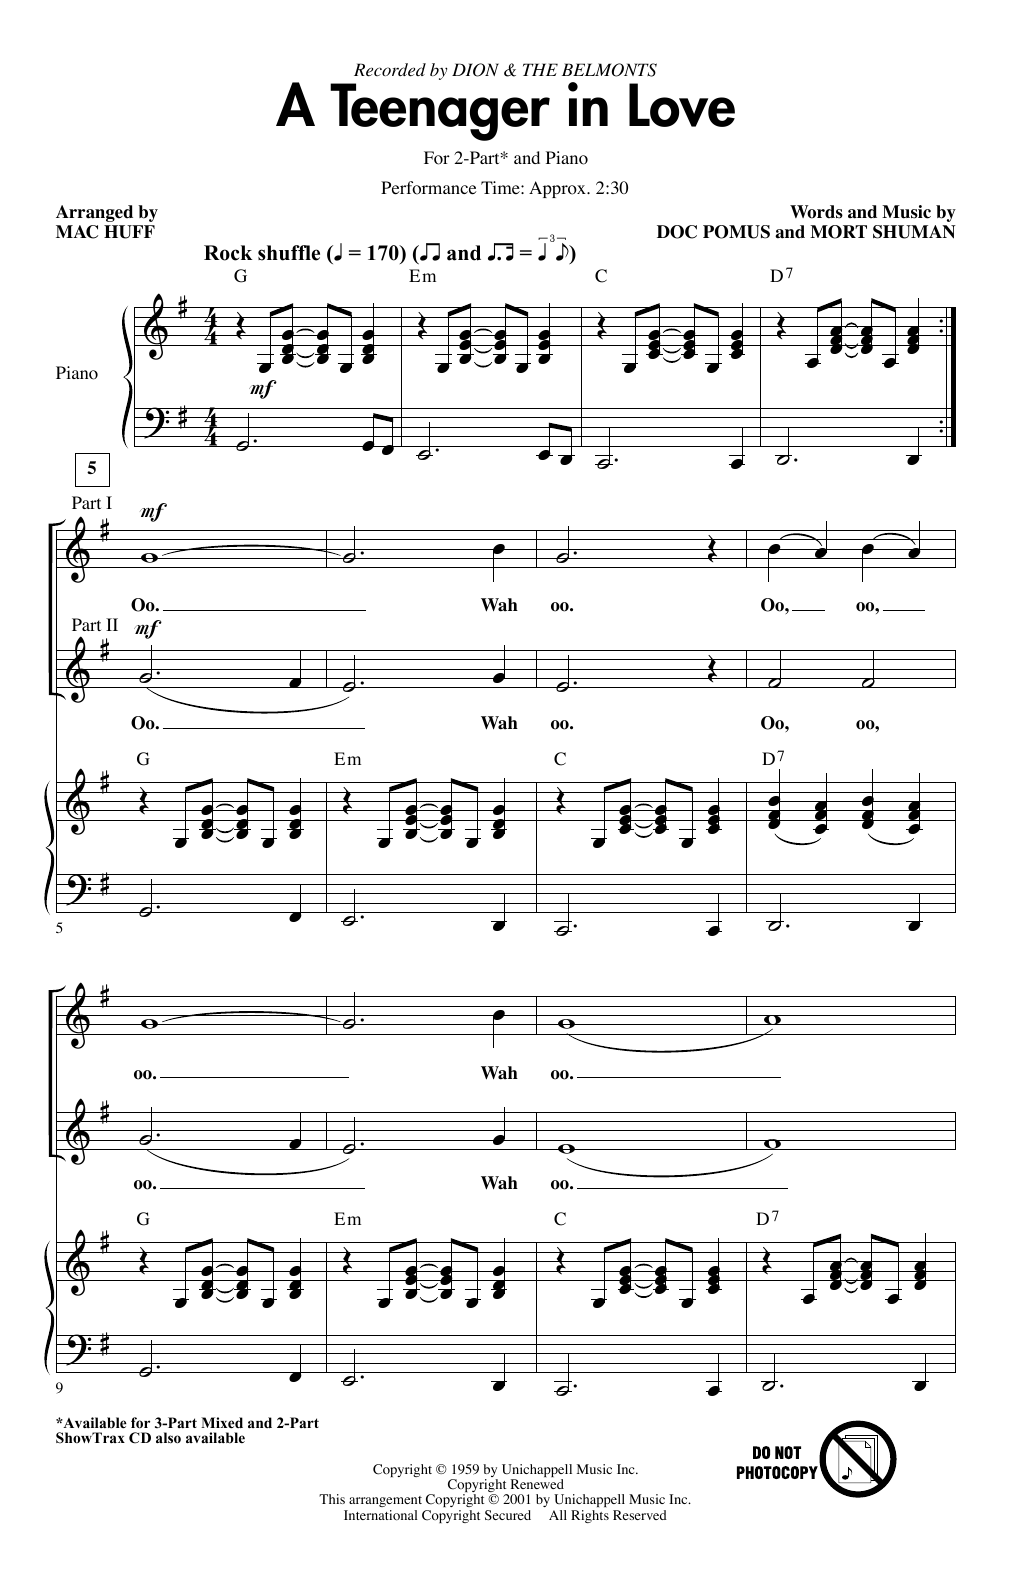 Download Dion & The Belmonts A Teenager In Love (arr. Mac Huff) Sheet Music